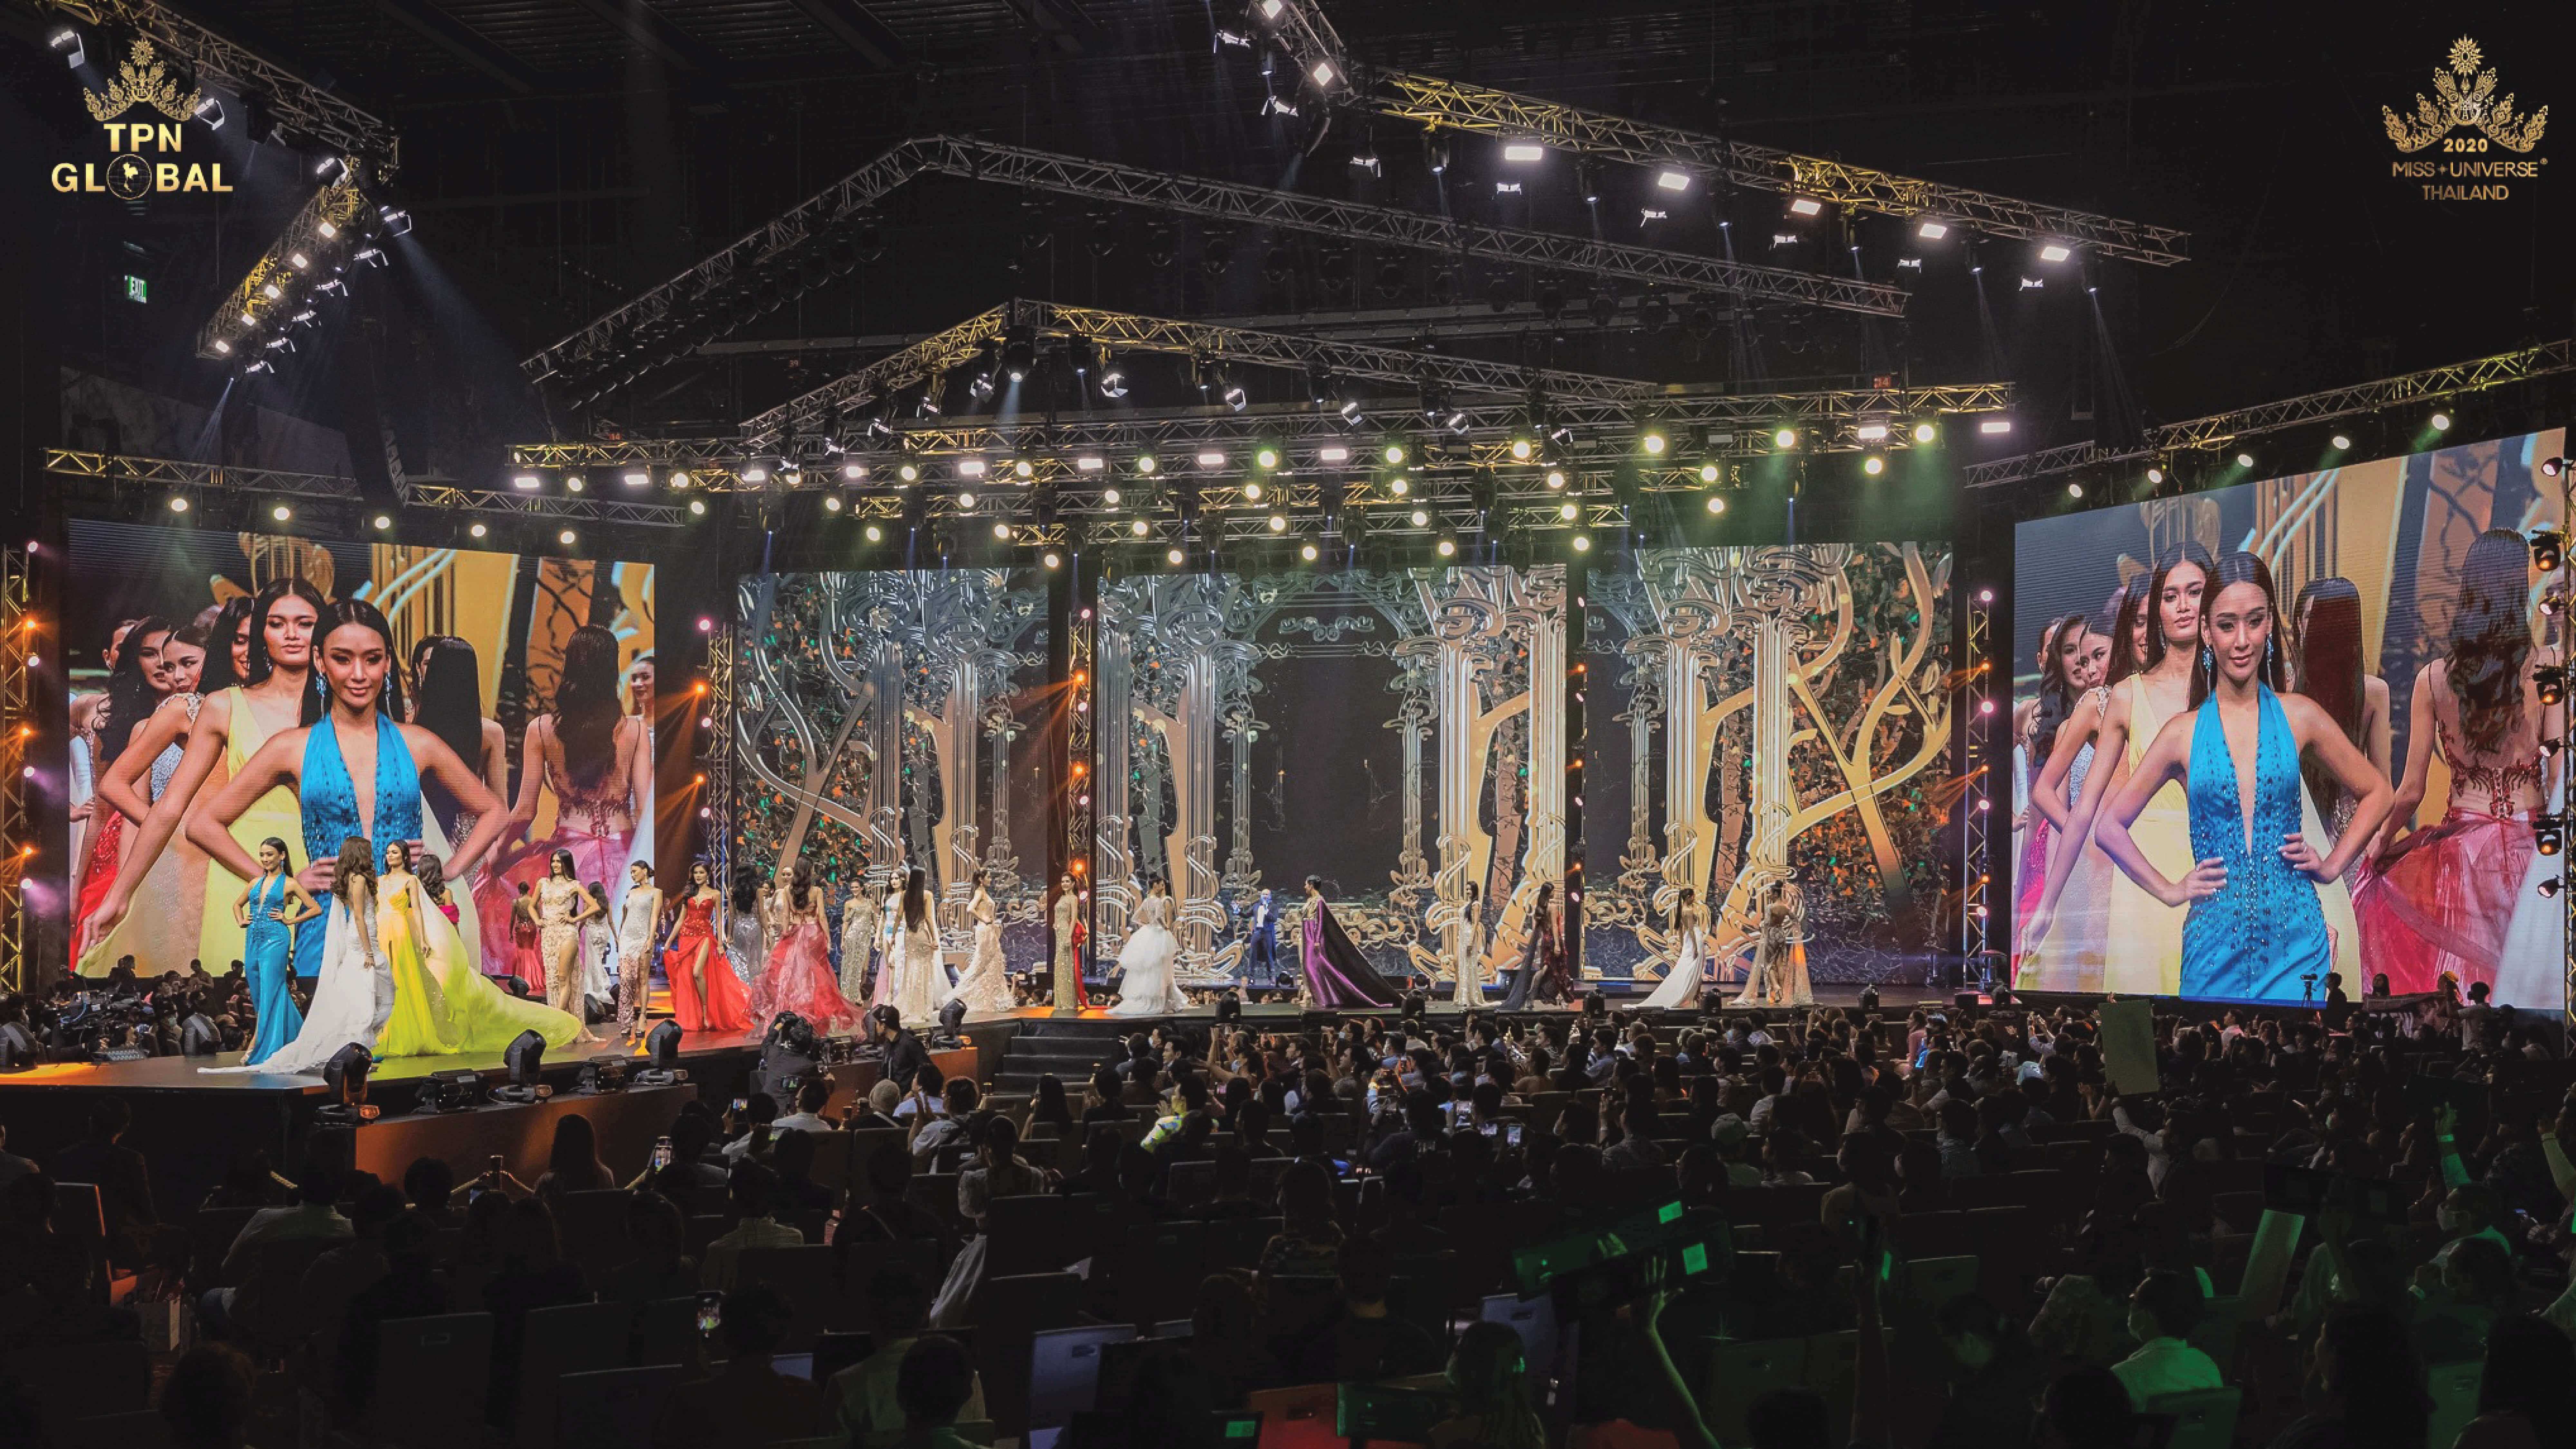 0 - Miss Universe Thailand 2020 รอบ Preliminary Competition “SHOW of SIAM”